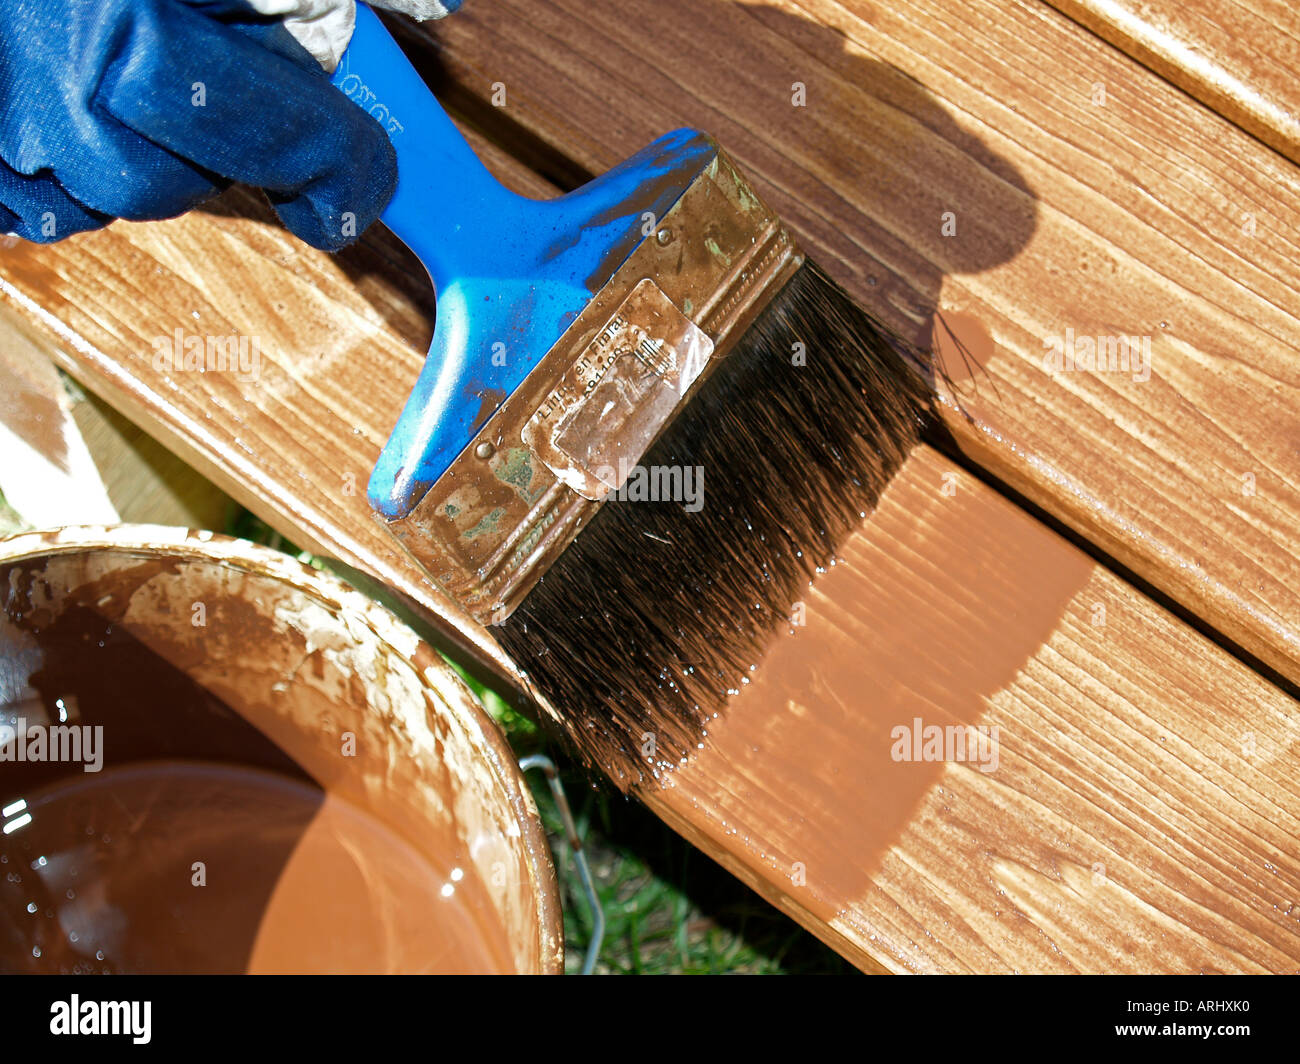 treatment of wood with protective coat a paint brush by painting wooden planks Stock Photo